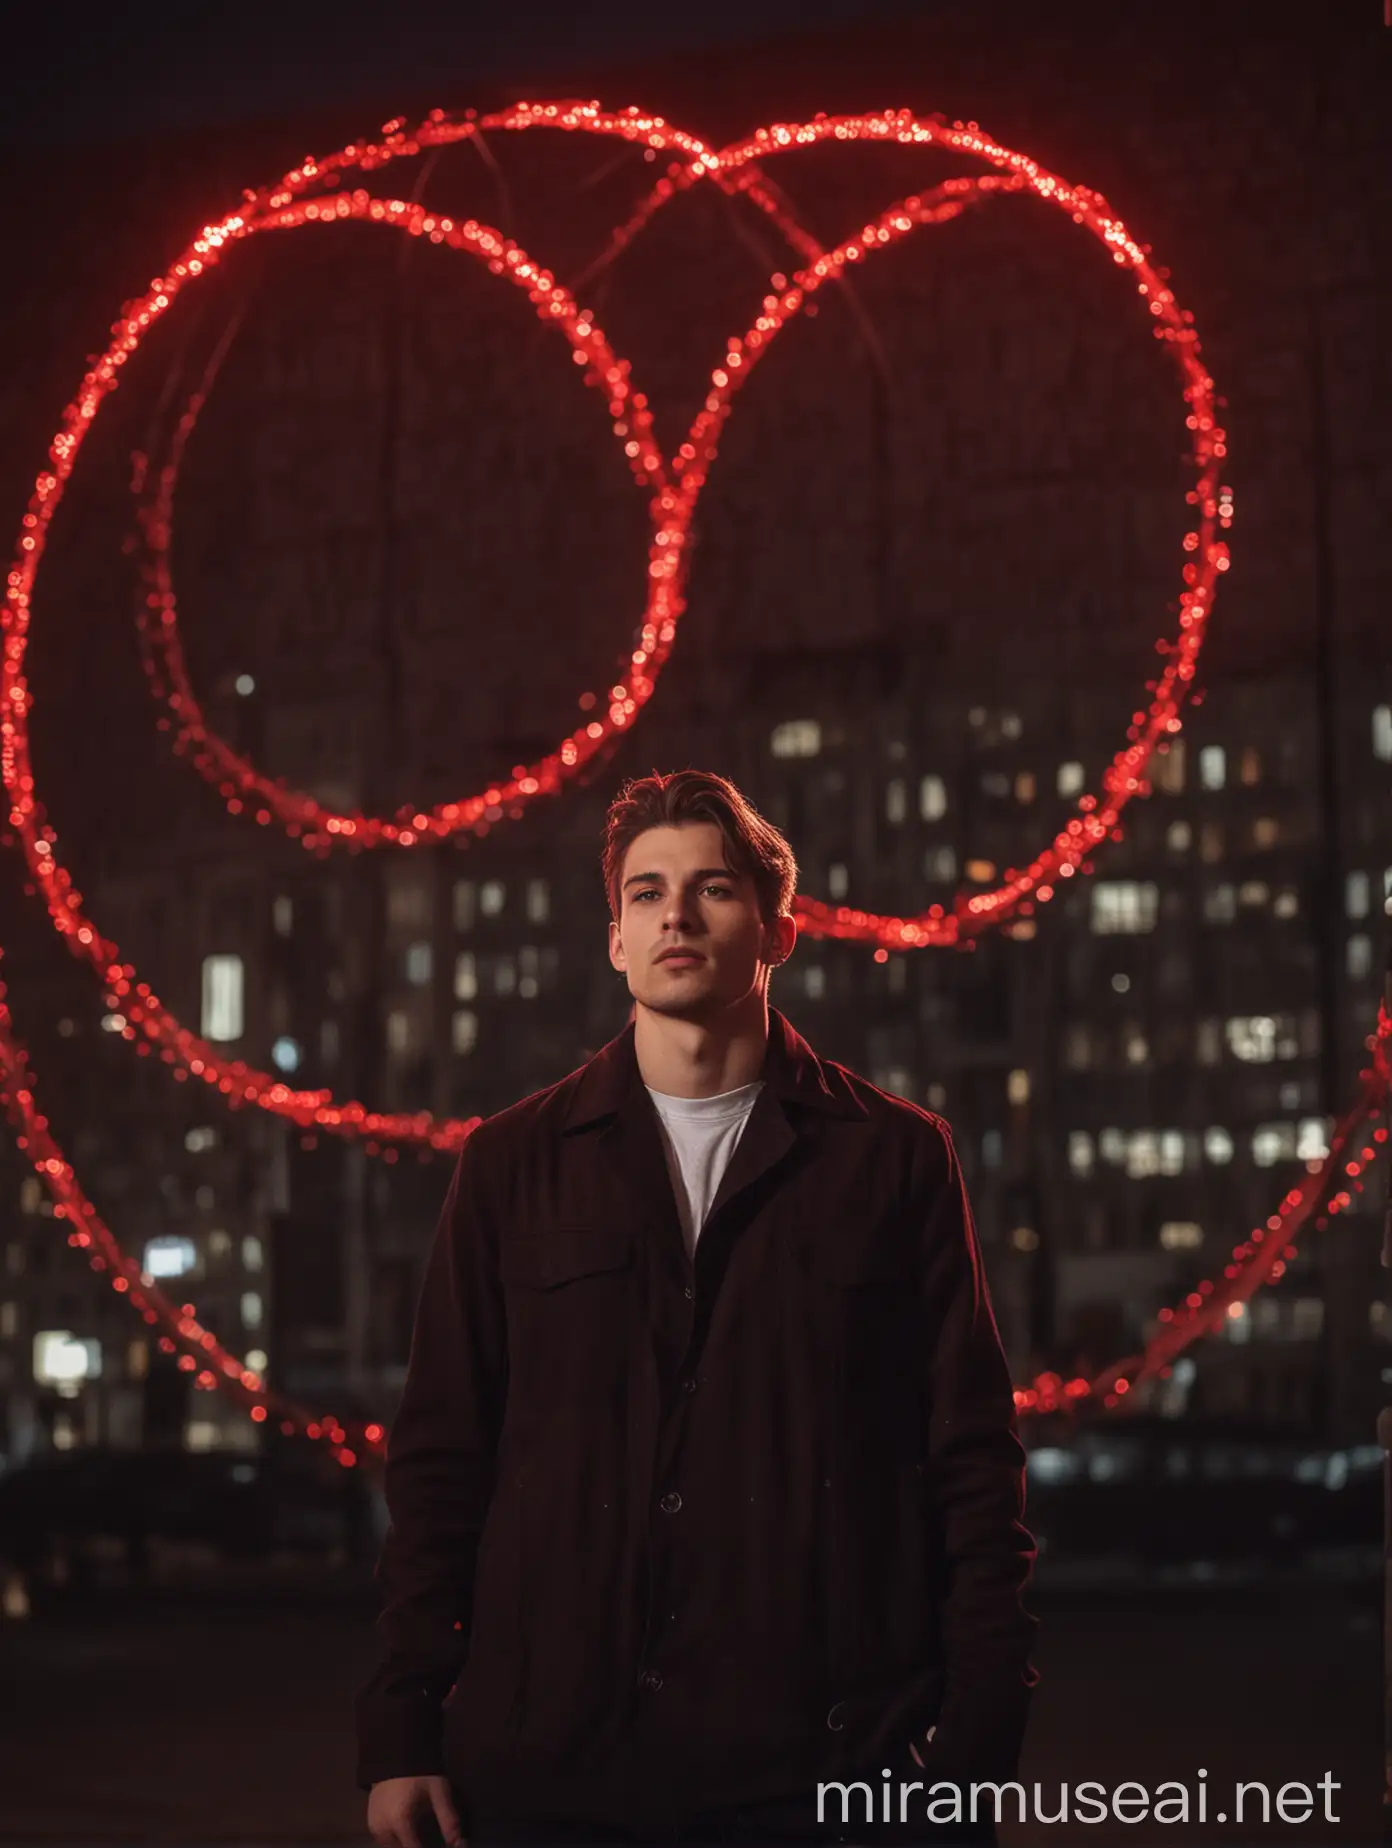 Handsome Young Man Surrounded by Glowing Red Ring Lights Against Urban Night Sky